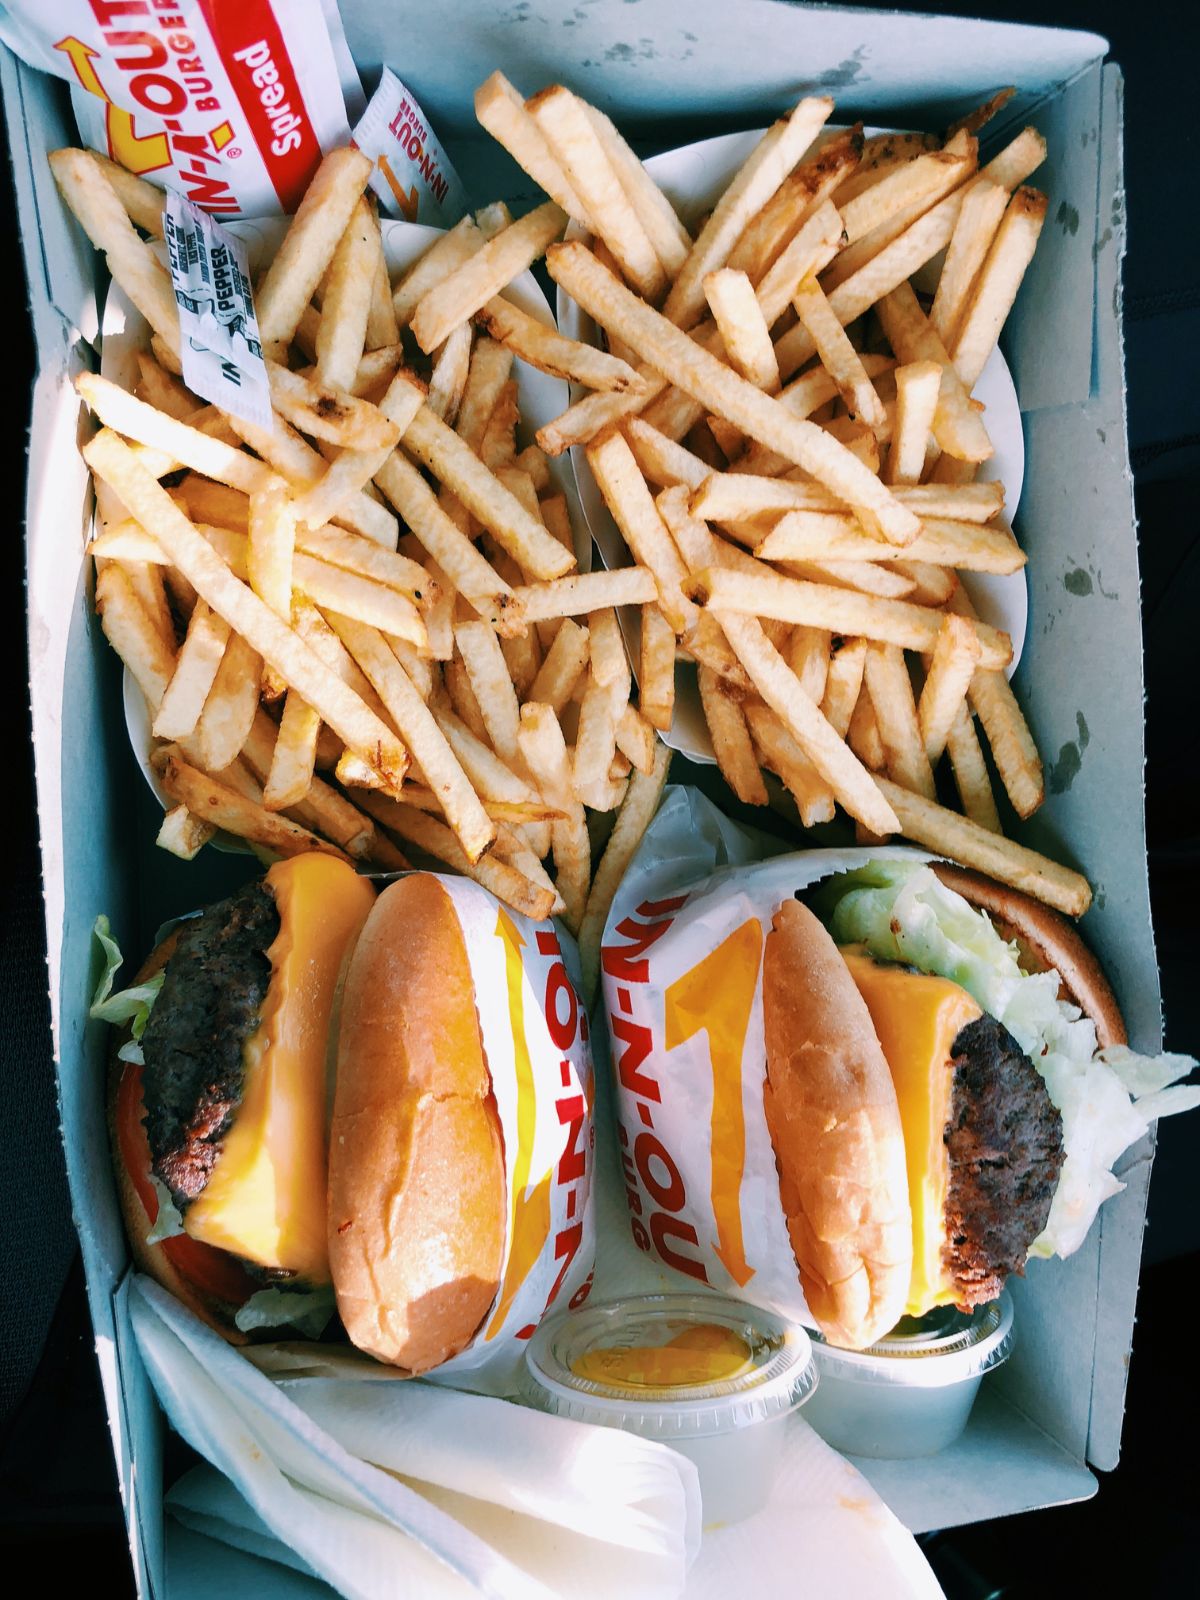 Take out burgers and fries on a platter.